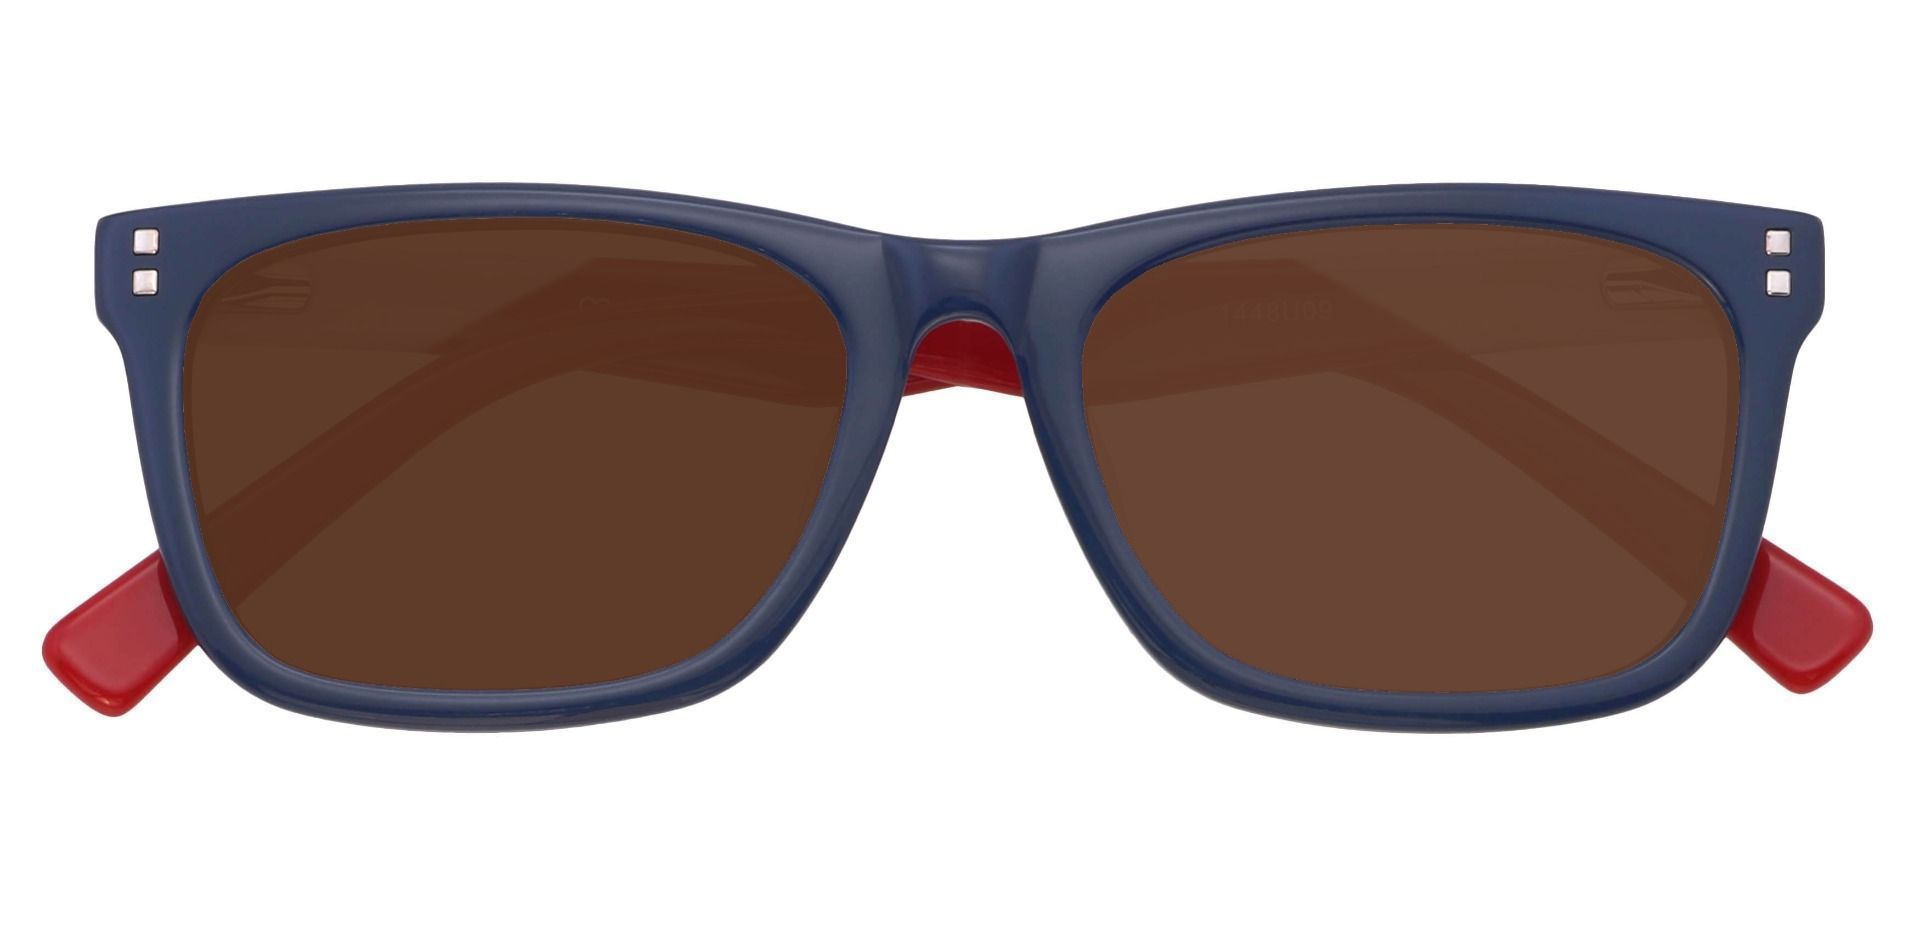 Quincy Rectangle Non-Rx Sunglasses - Blue Frame With Brown Lenses